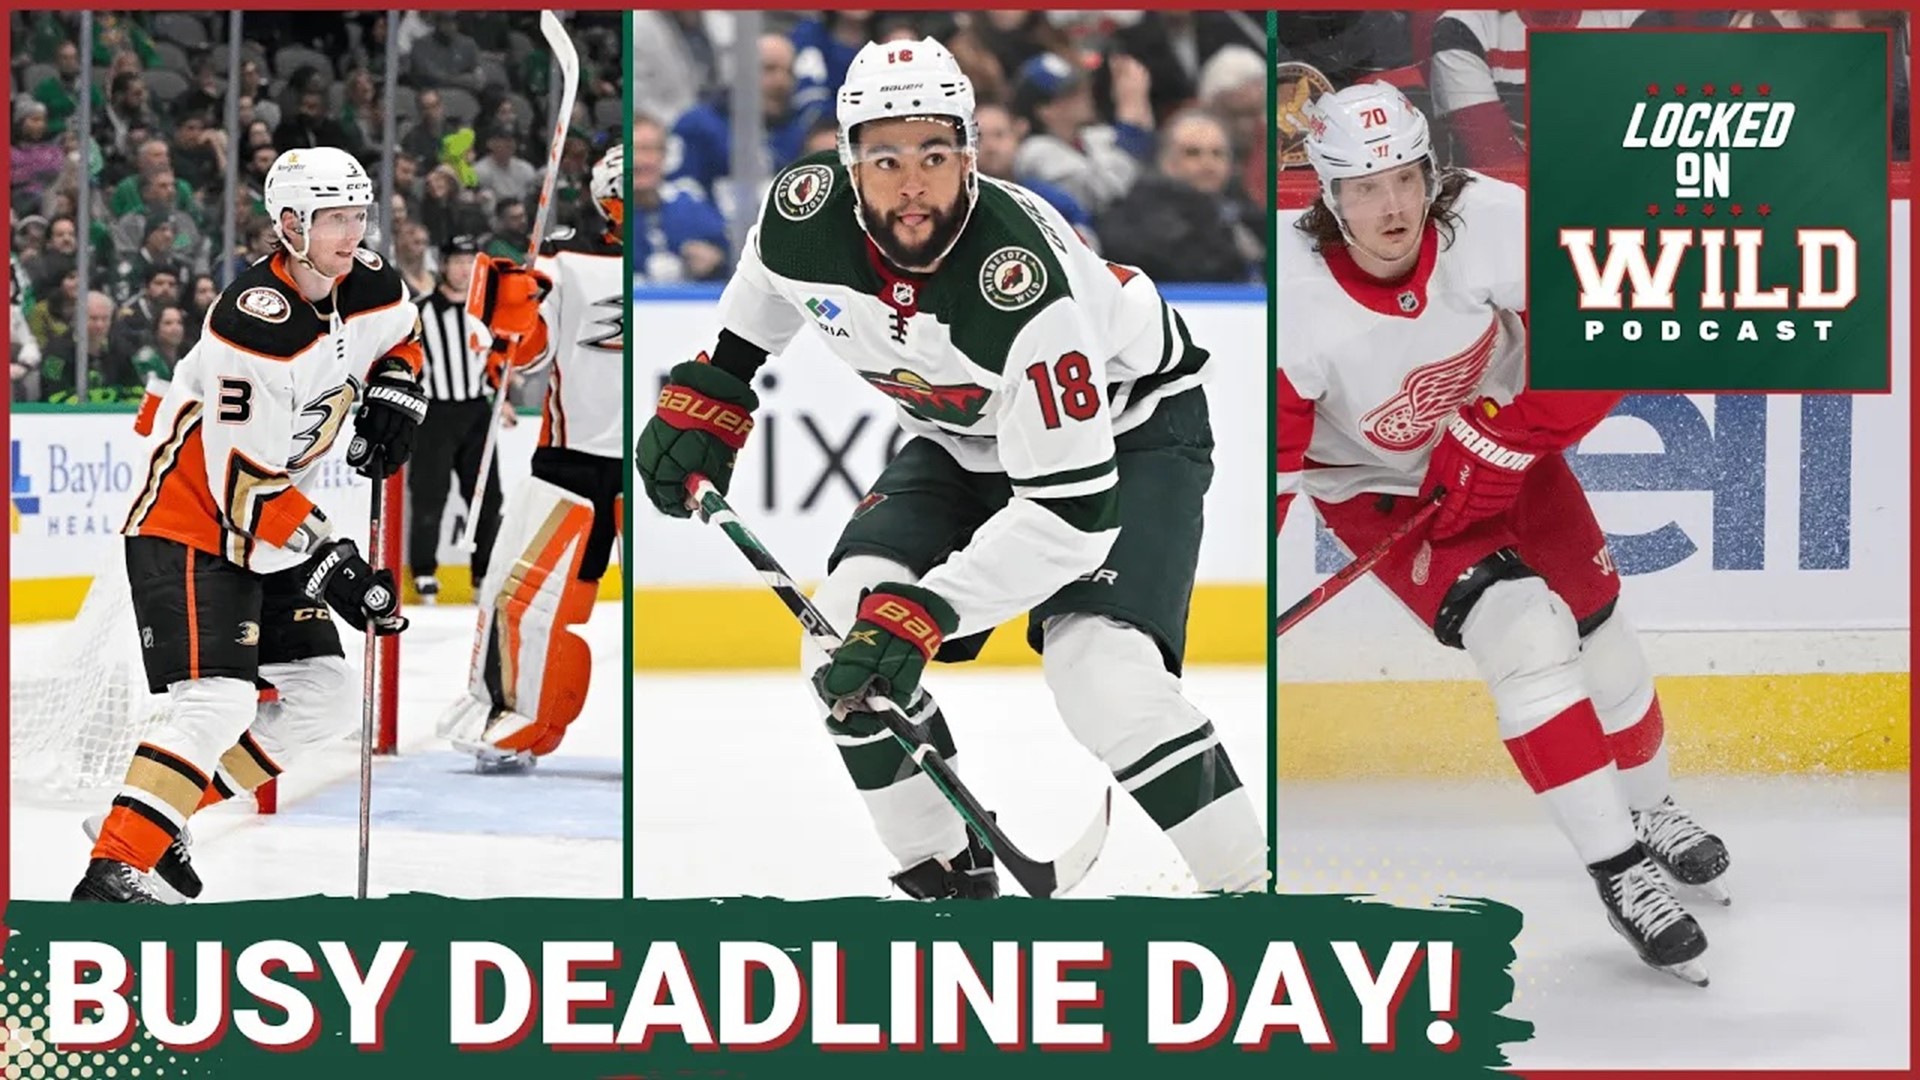 On today's episode of Locked on Wild, we break down the Deadline Day moves by Bill Guerin that saw him send Jordan Greenway to Buffalo and acquire a couple veterans.